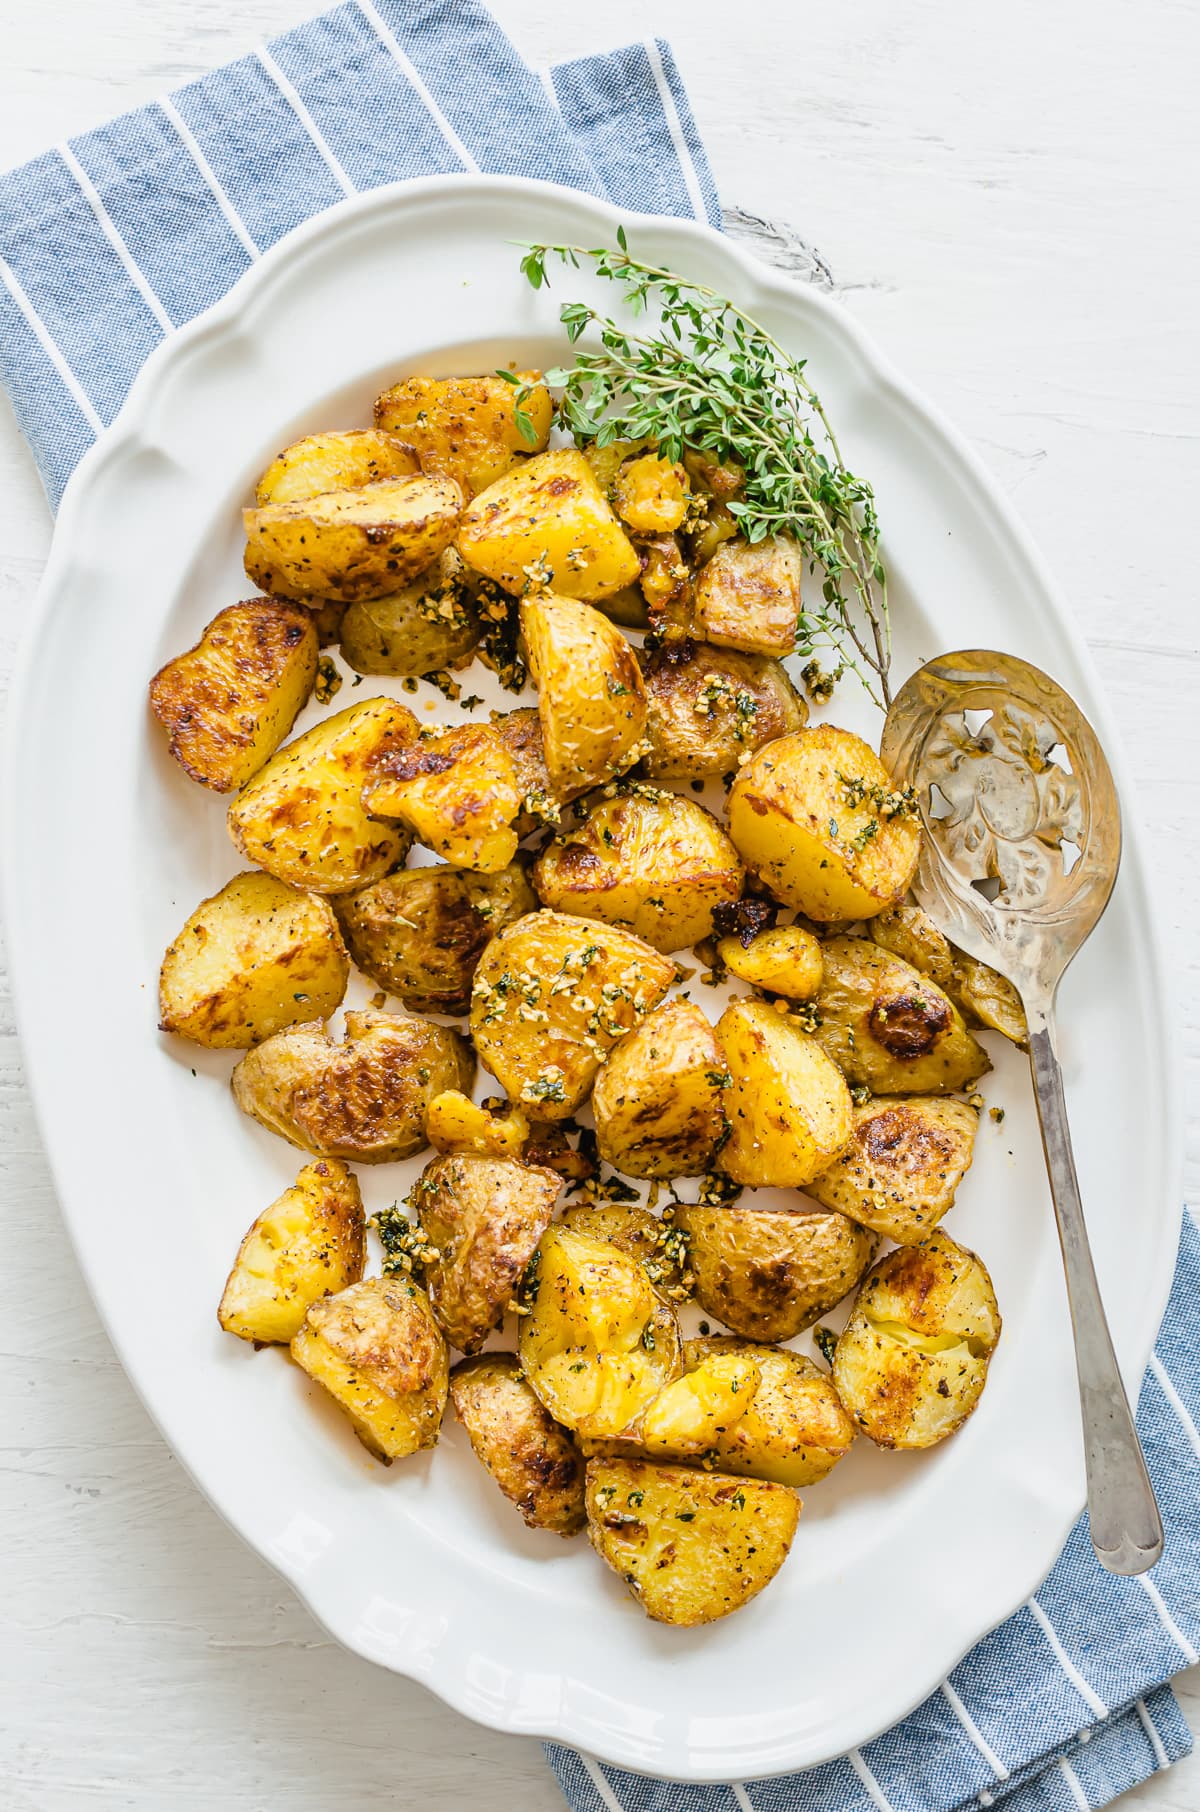 Plated crispy roasted potatoes with a serving spoon and sprig of thyme on the side.